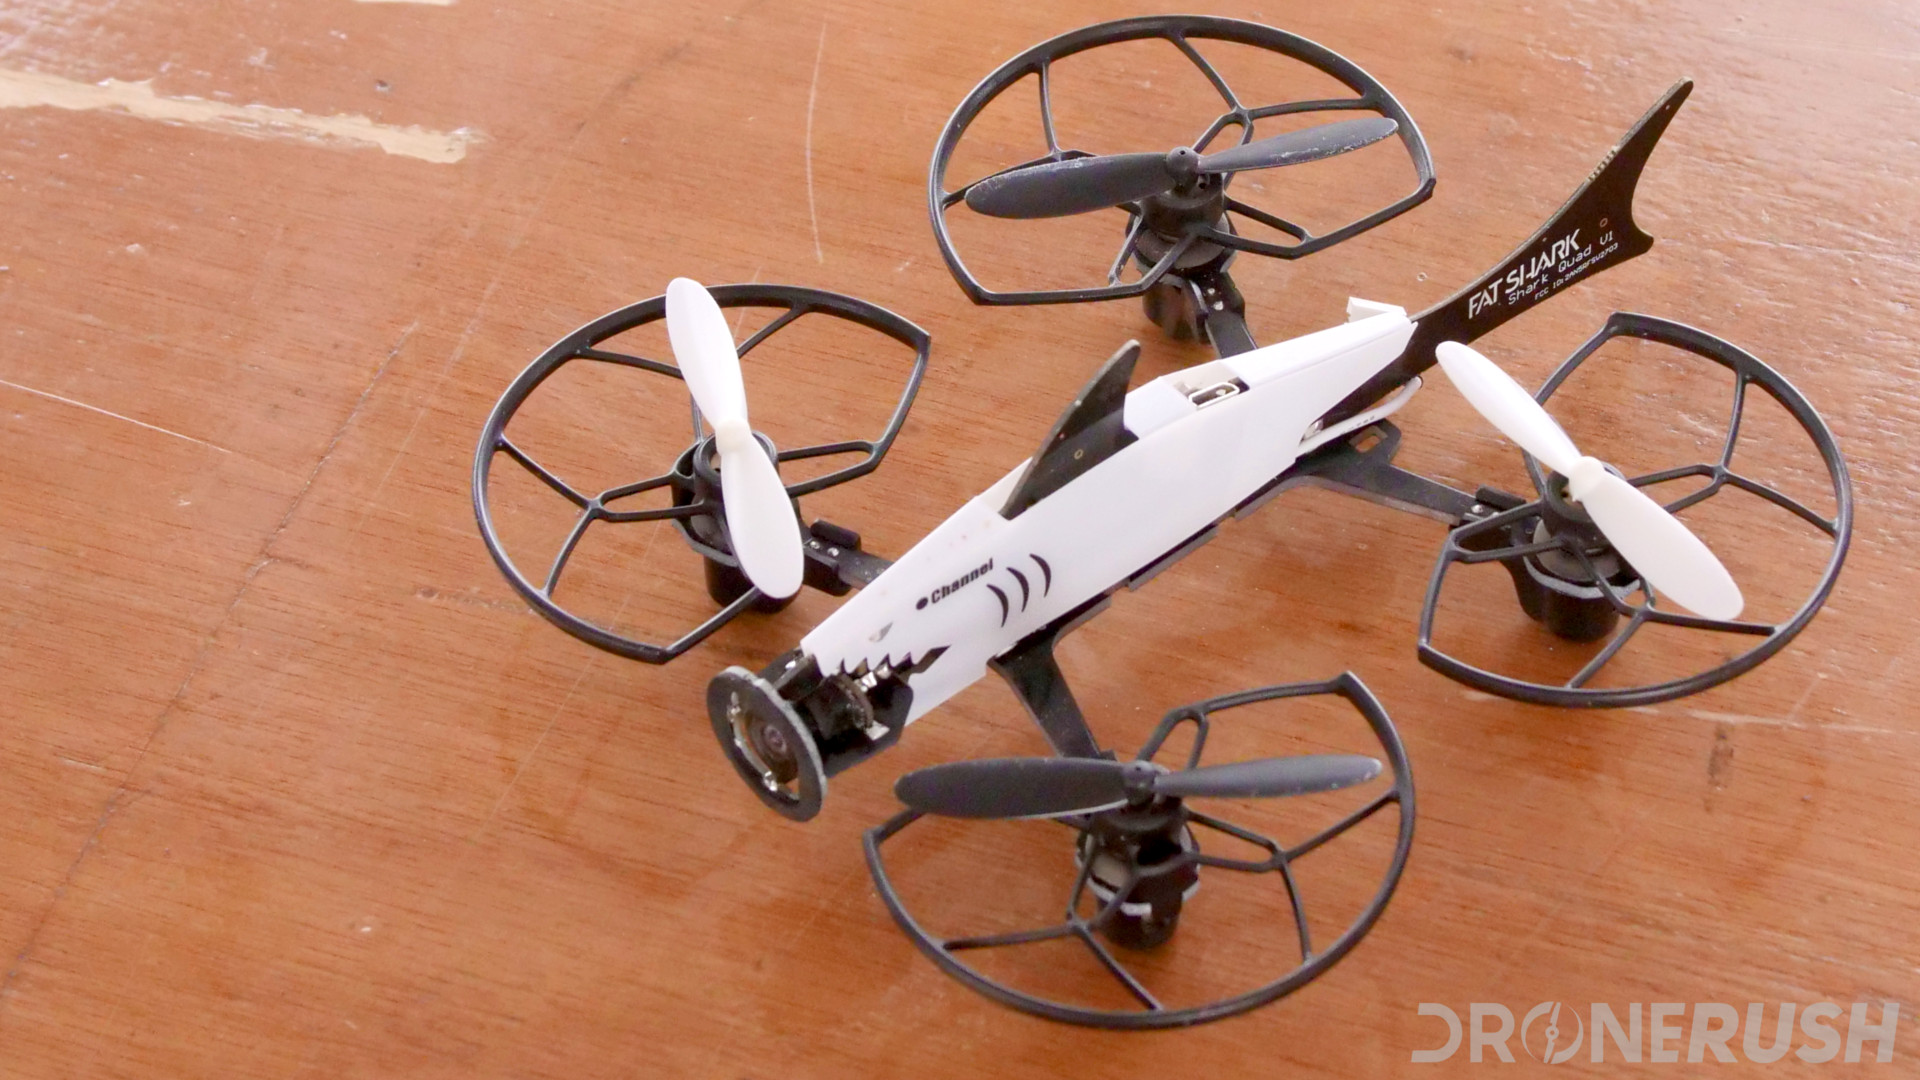 Start drone racing with the best drones under $250 Drone